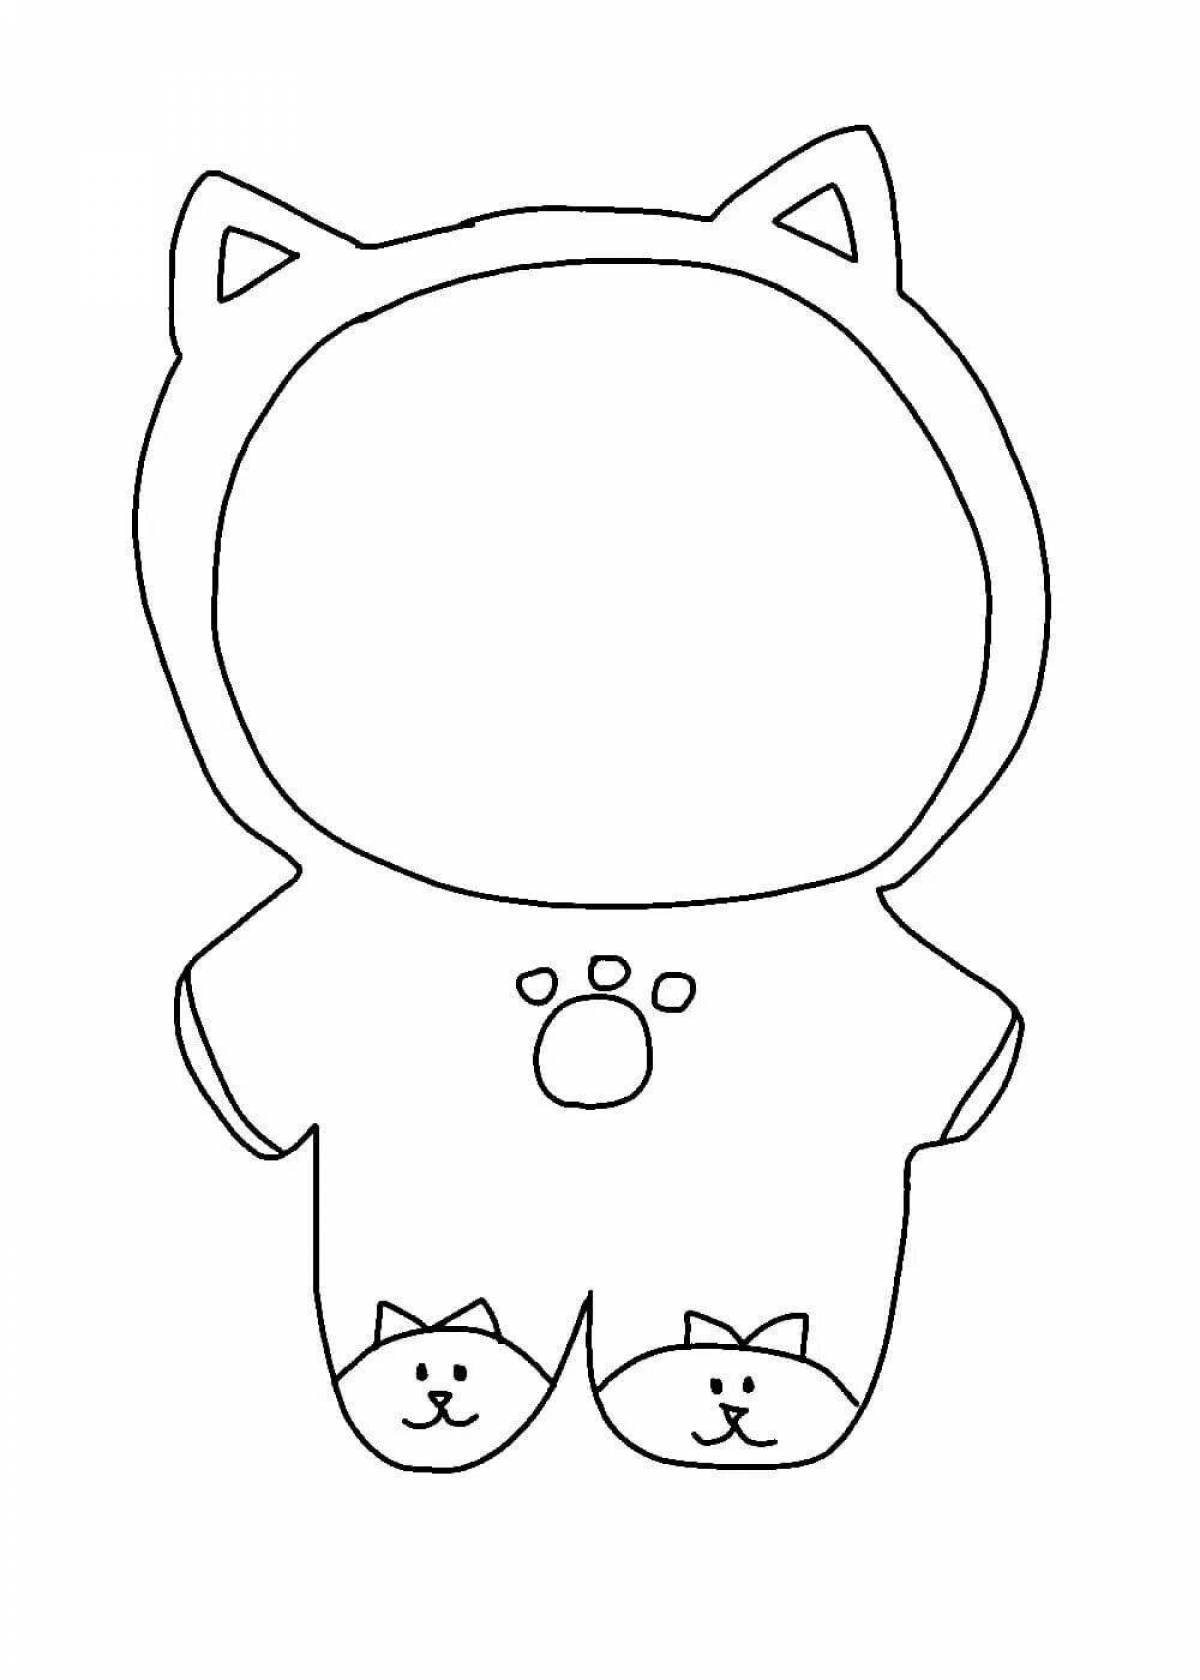 Funny duck coloring pages lala fanfan